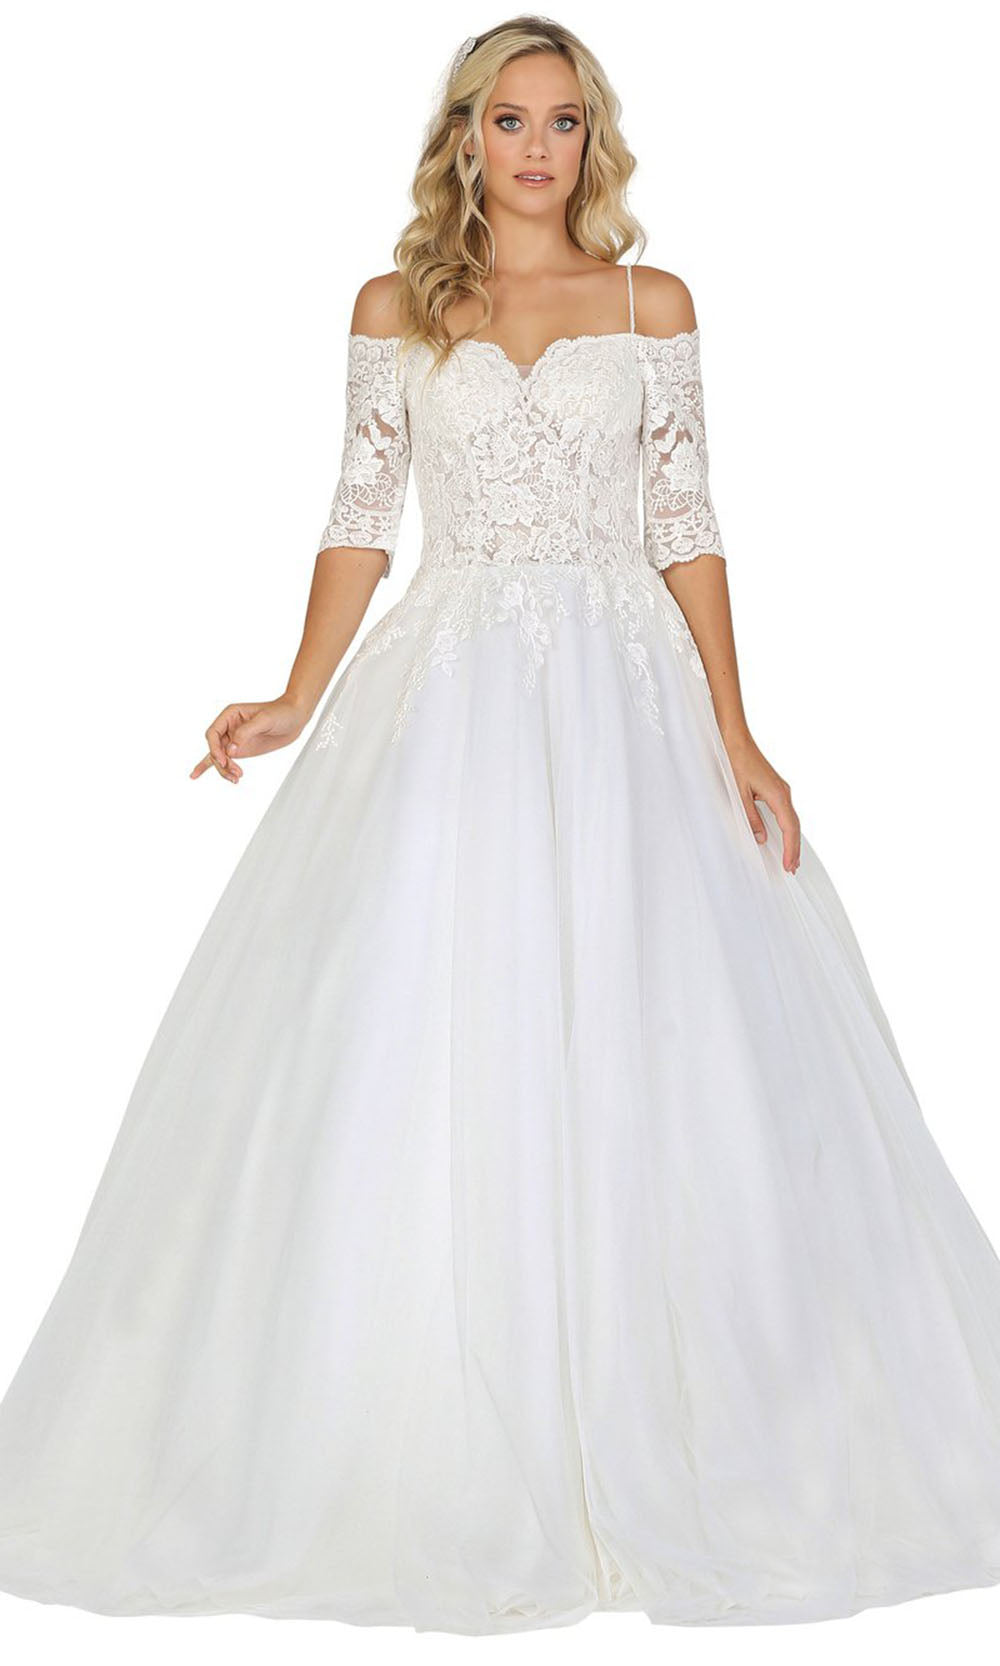 Dancing Queen - 170 Quarter Sleeve Laced A-Line Dress In White